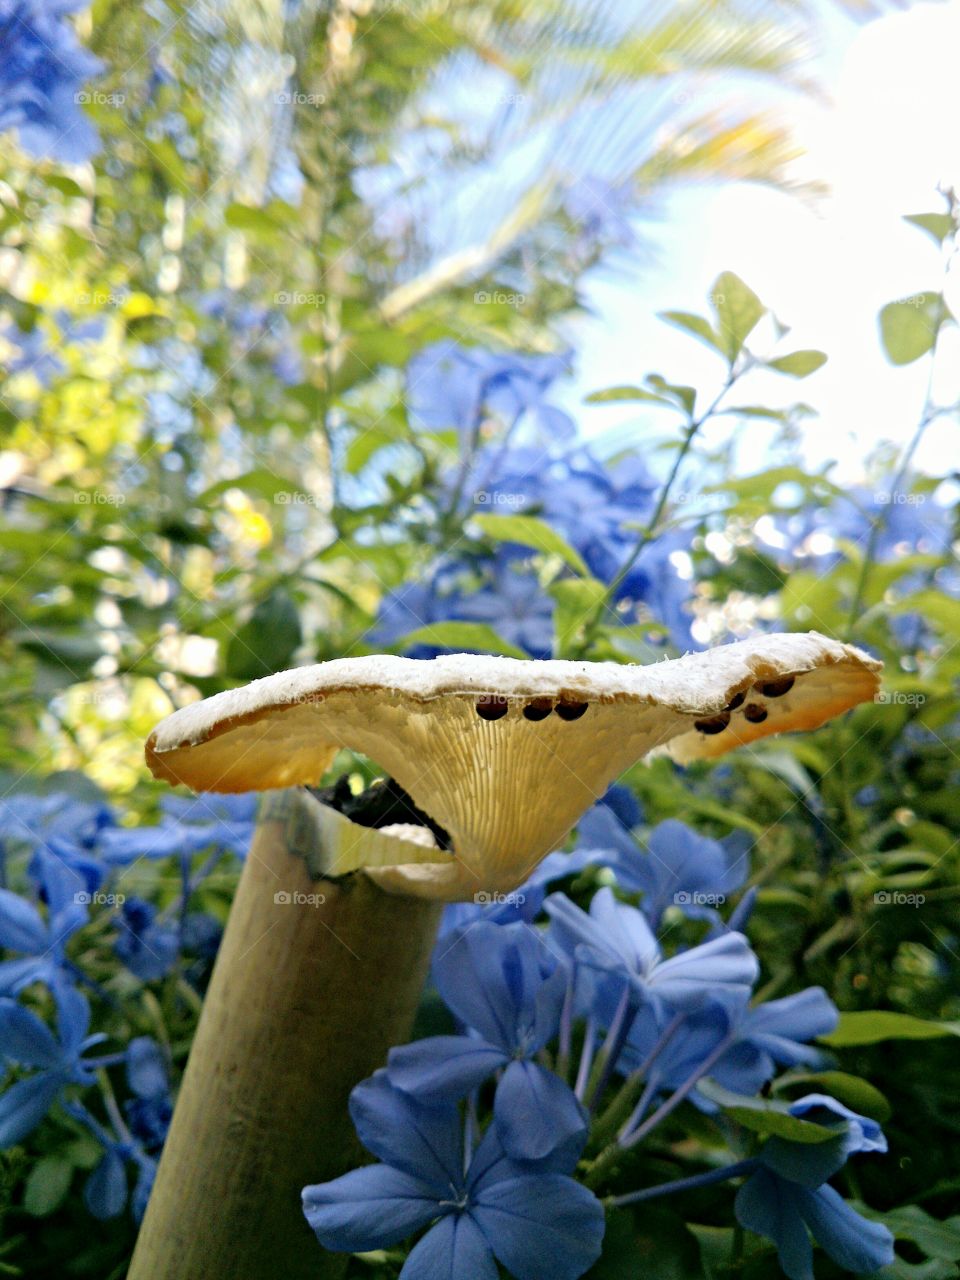 Mushroom. Garden mushroom with blue flowers. There are some insects inner side of the mushroom.